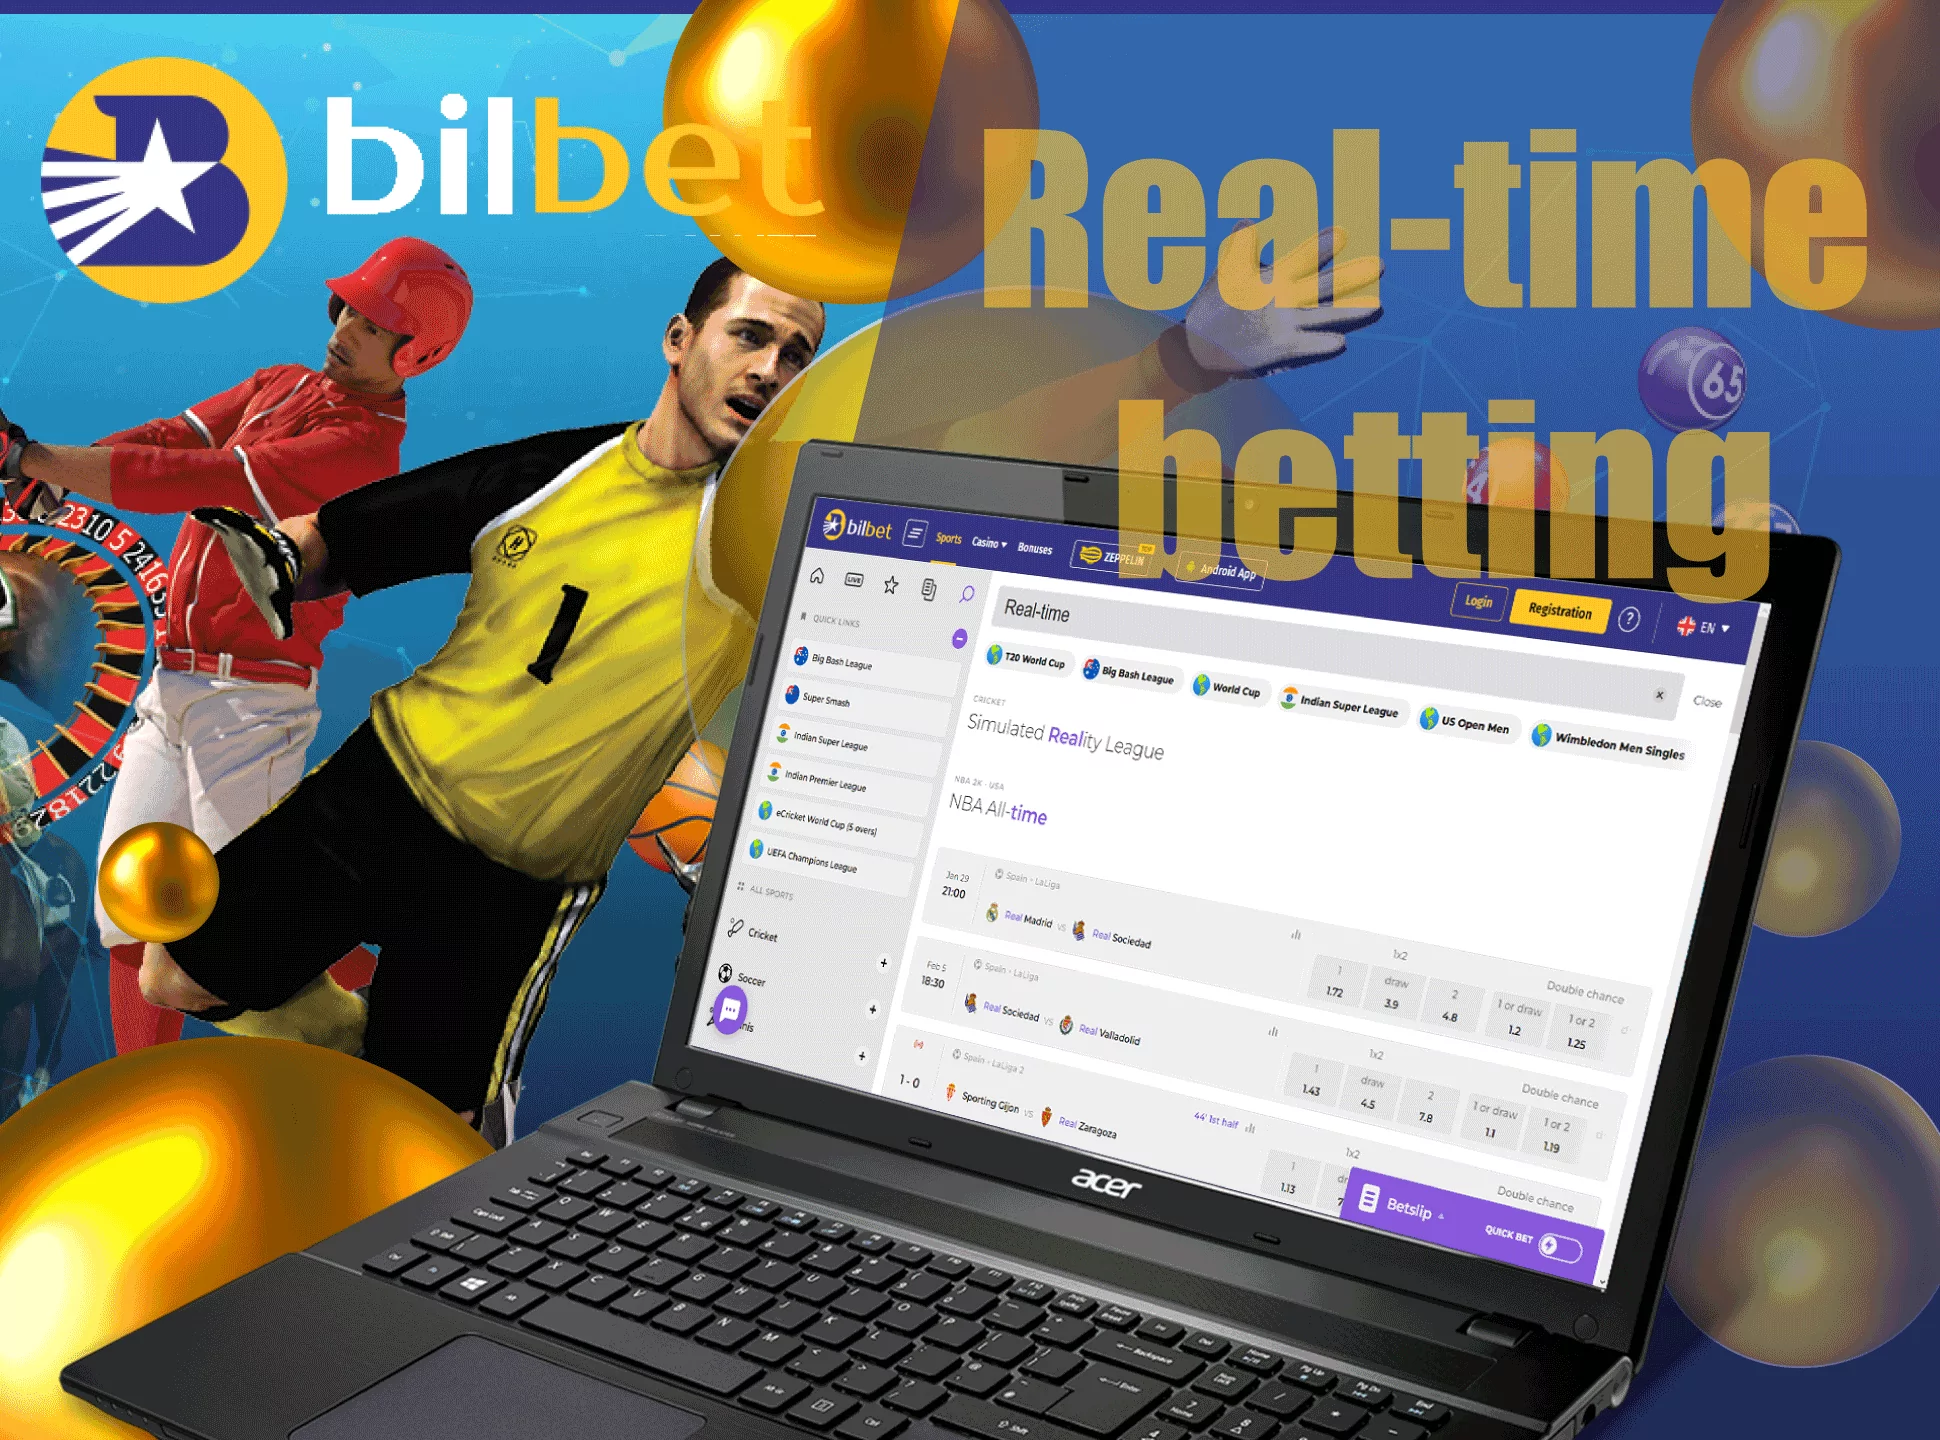 You can place bets right during the match at Bilbet.